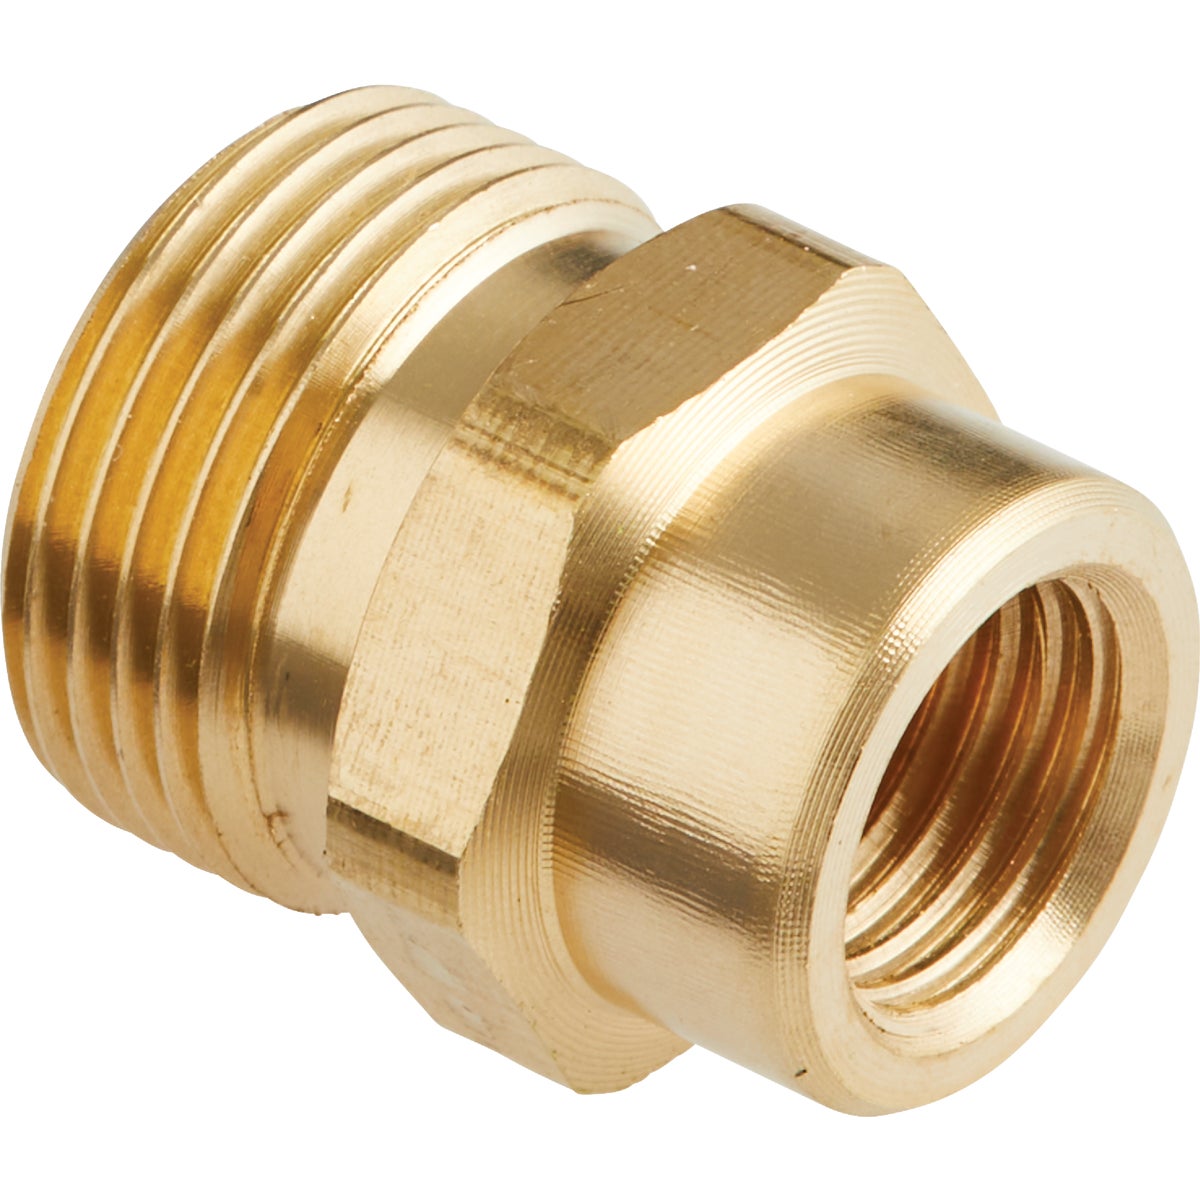 Item 705656, Use pressure washer nipple in combination with screw couplers.